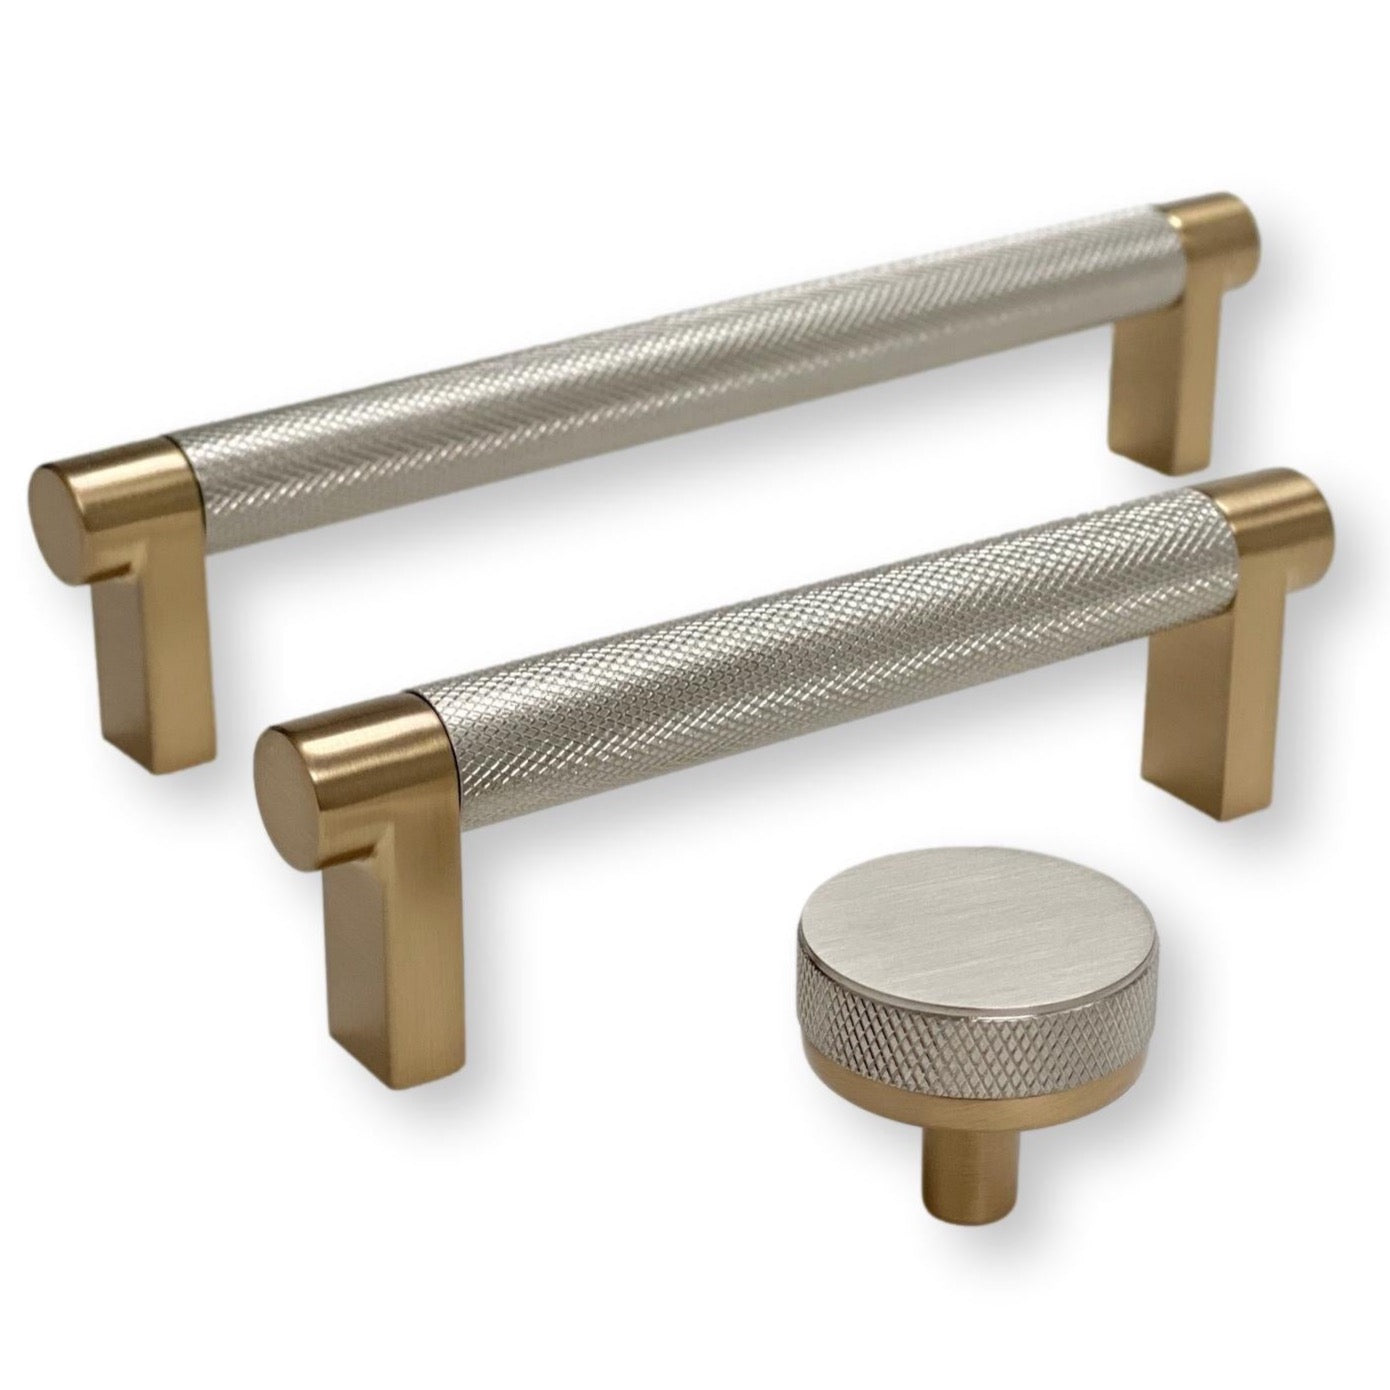 Knurled "Converse" Champagne Bronze and Brushed Nickel Dual-Finish Knobs and Pulls - Industry Hardware